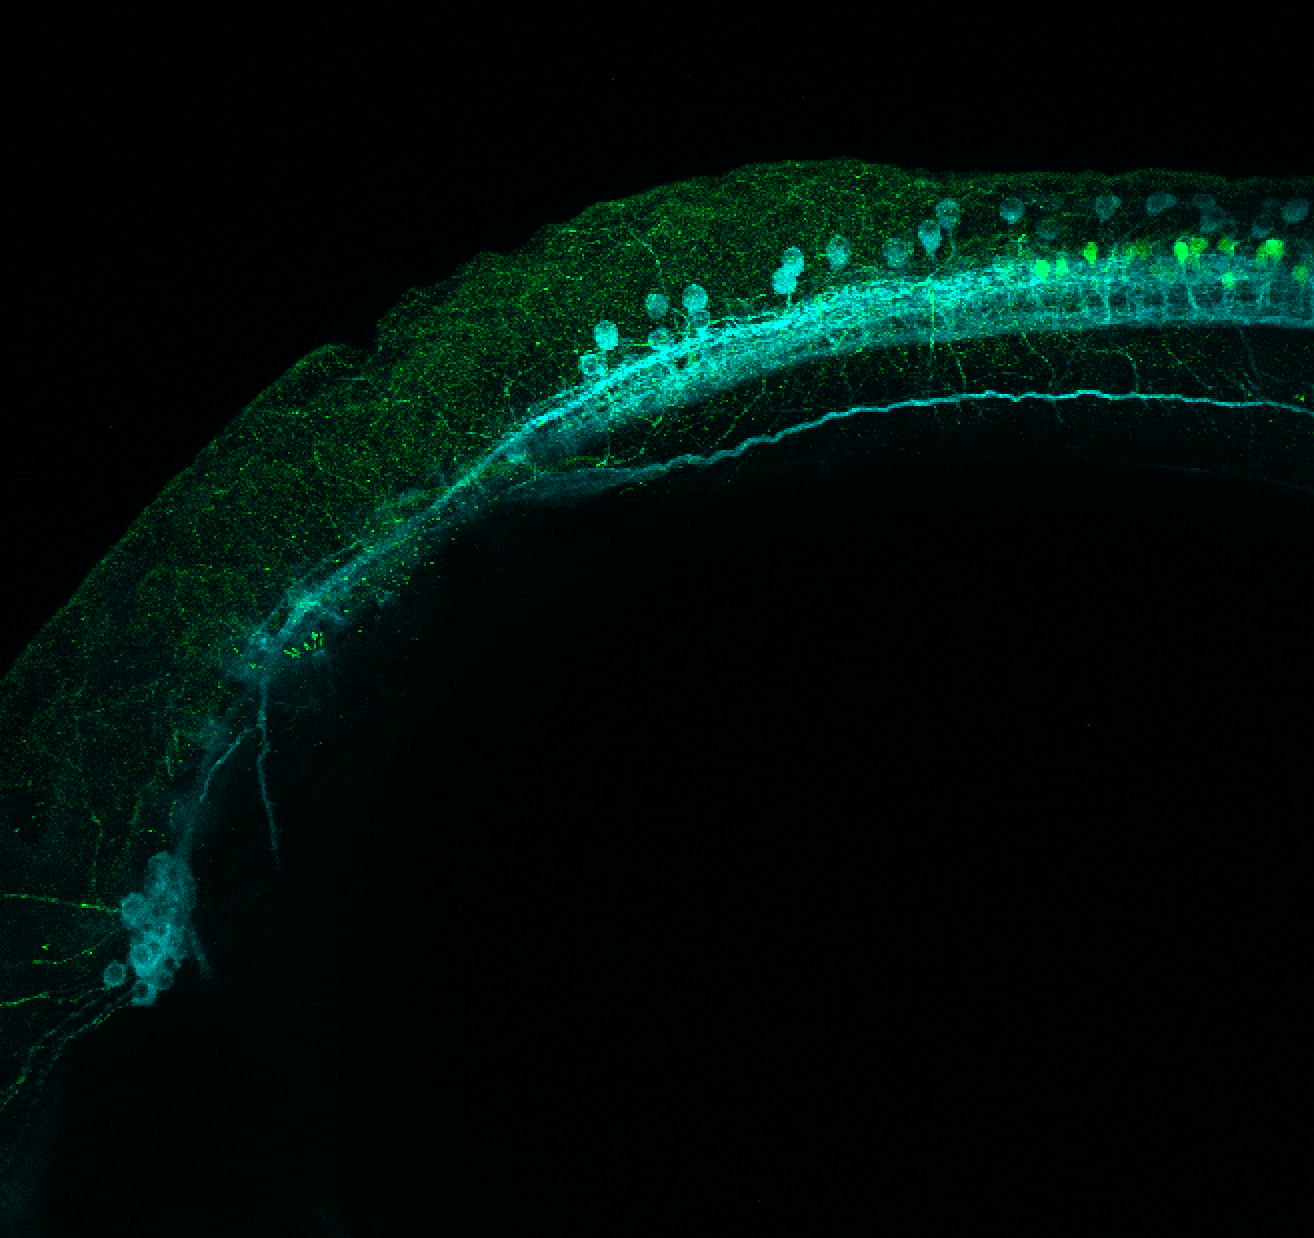 Tg(slc6a5:GFP) Lateral 24hpf